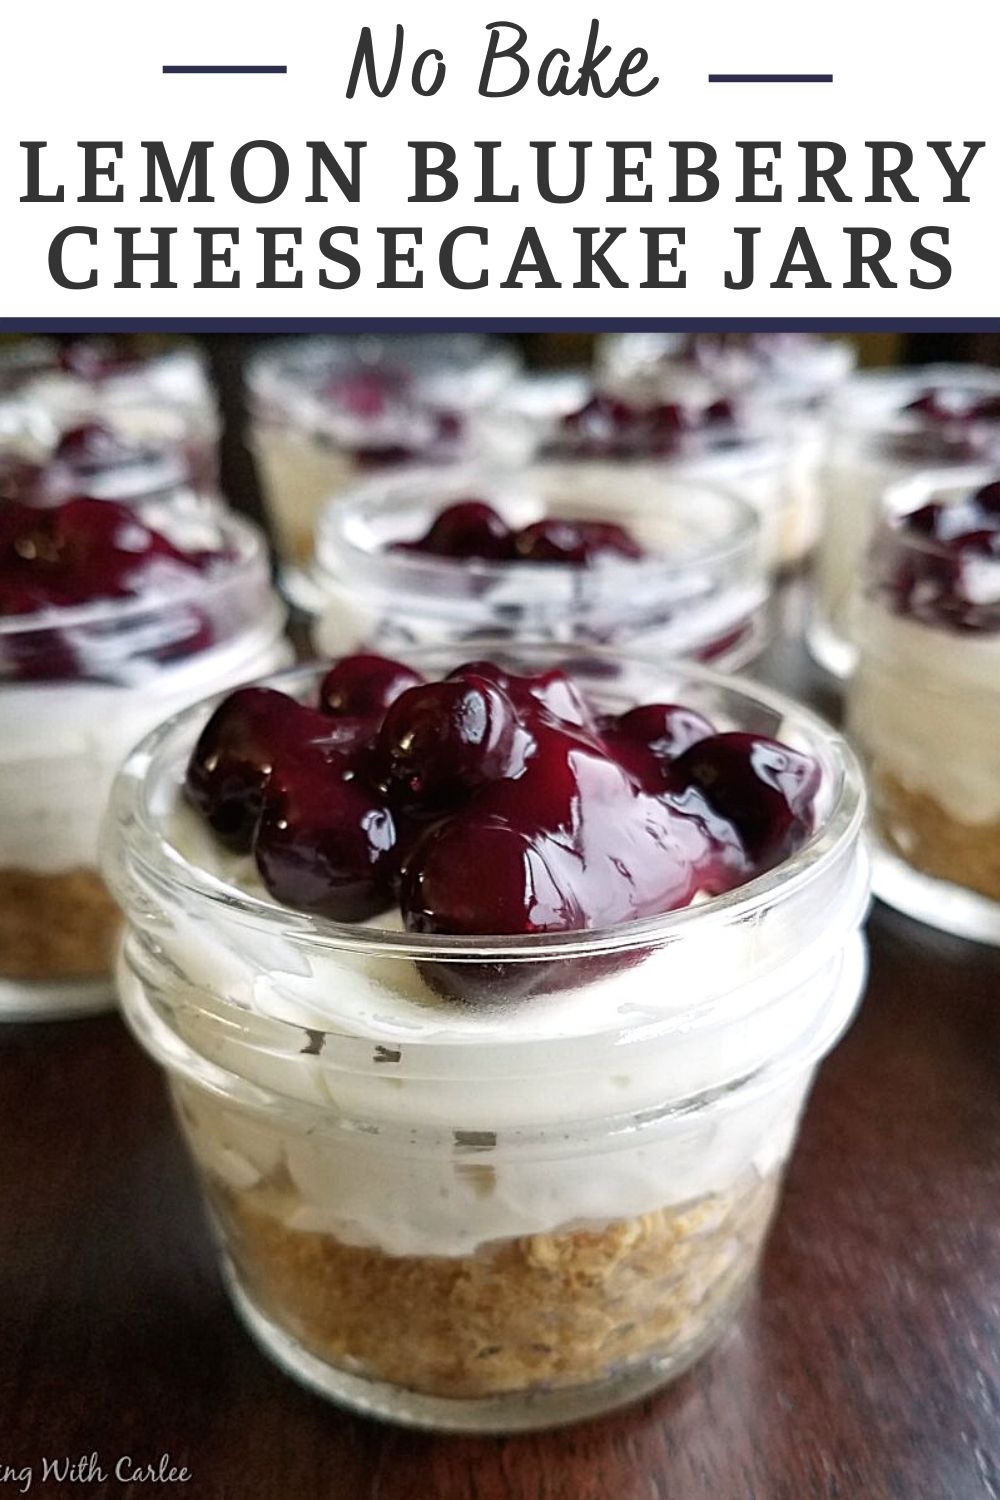 These little no bake lemon cheesecakes are served in an individual jar making them perfectly portable, giftable or hide-able if you want to keep them for yourself! The easy homemade blueberry topping is the perfect accompaniment to make them shine.